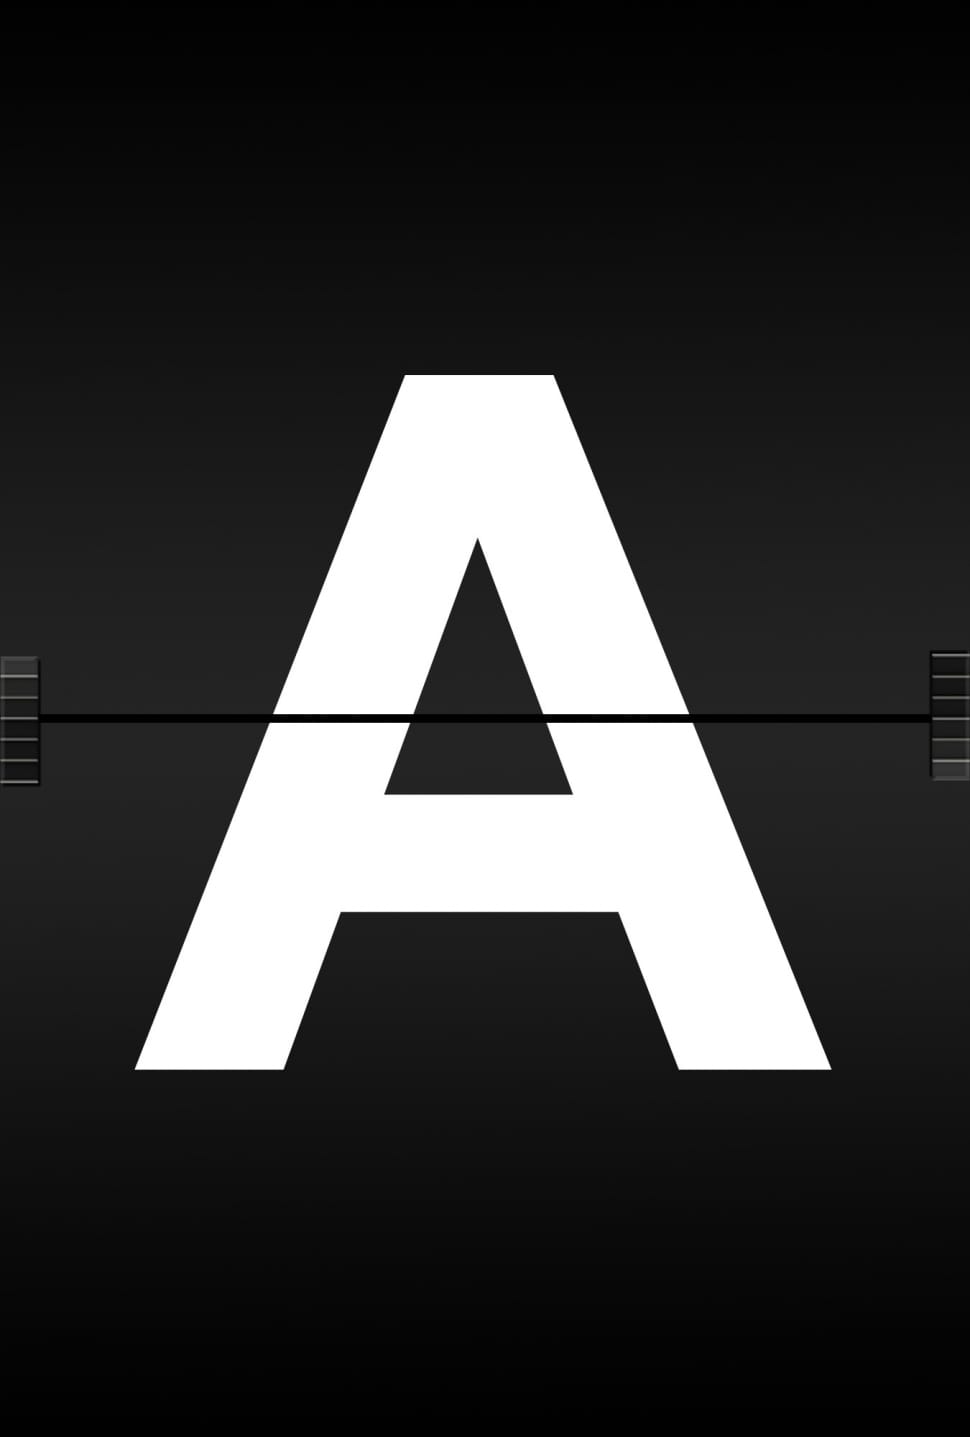 White Letter A Print Free Image Peakpx